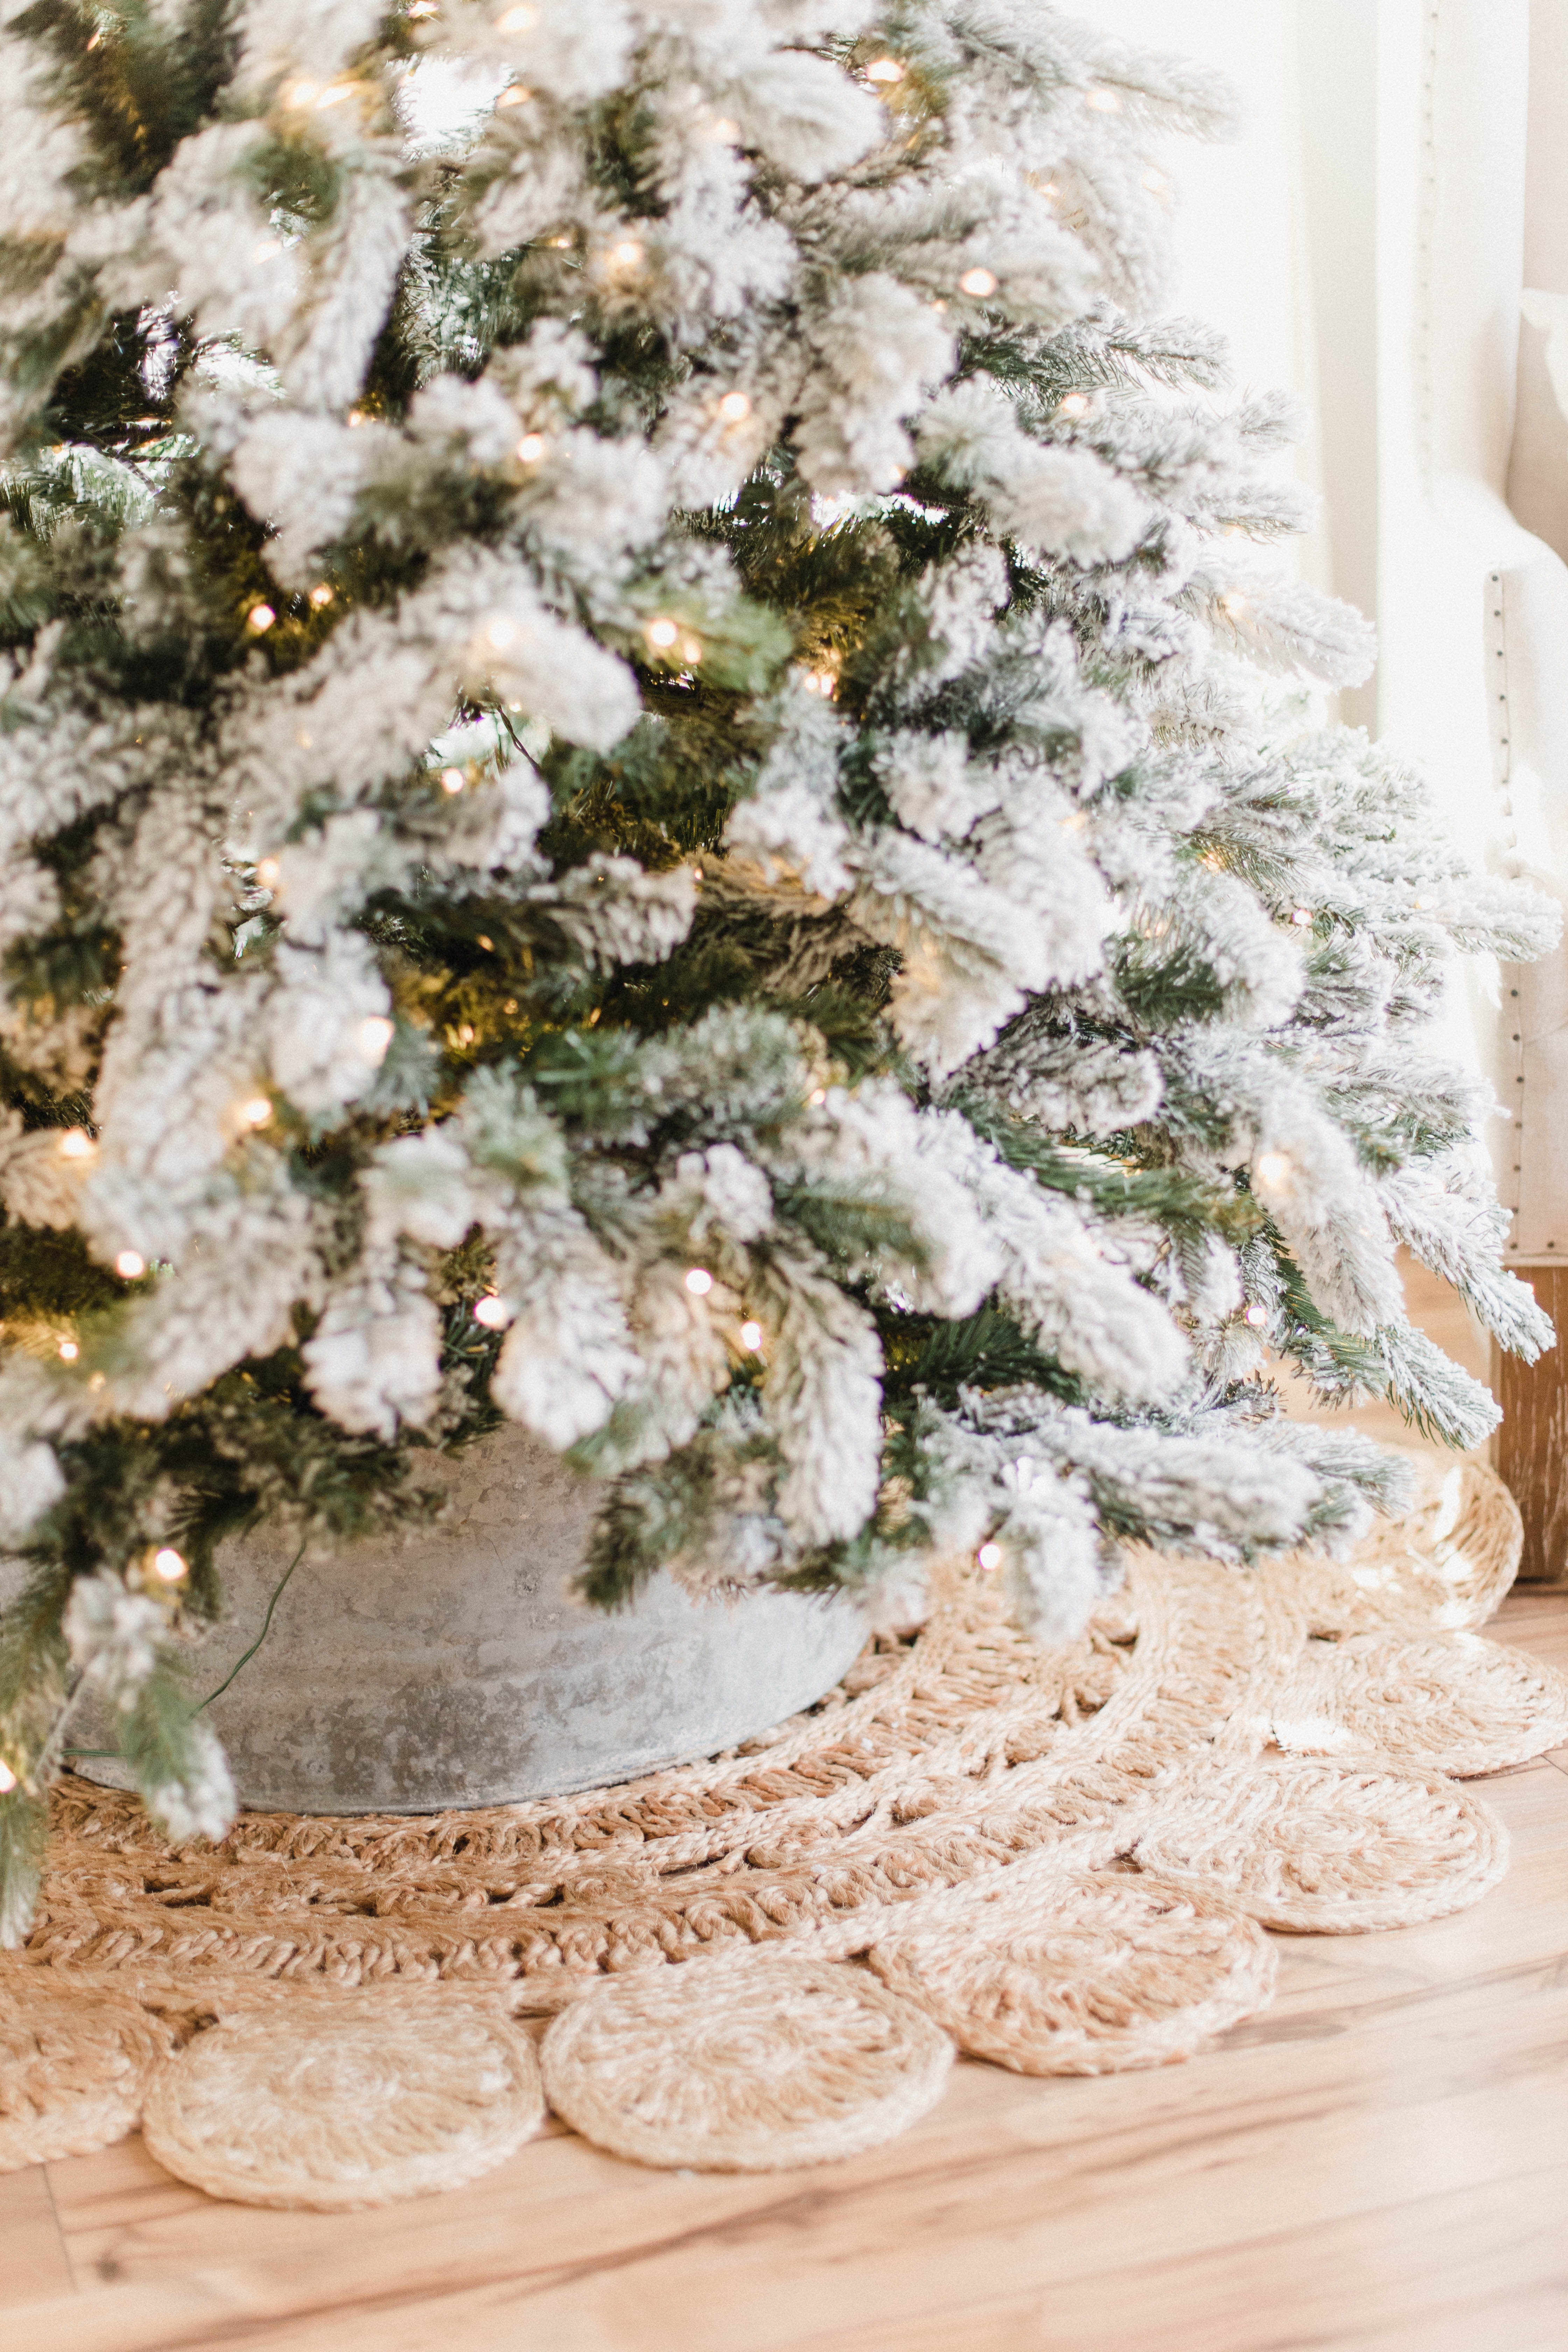 Connecticut life and style blogger Lauren McBride shares details and FAQs about her King of Christmas King Flock tree, including tree stand details.